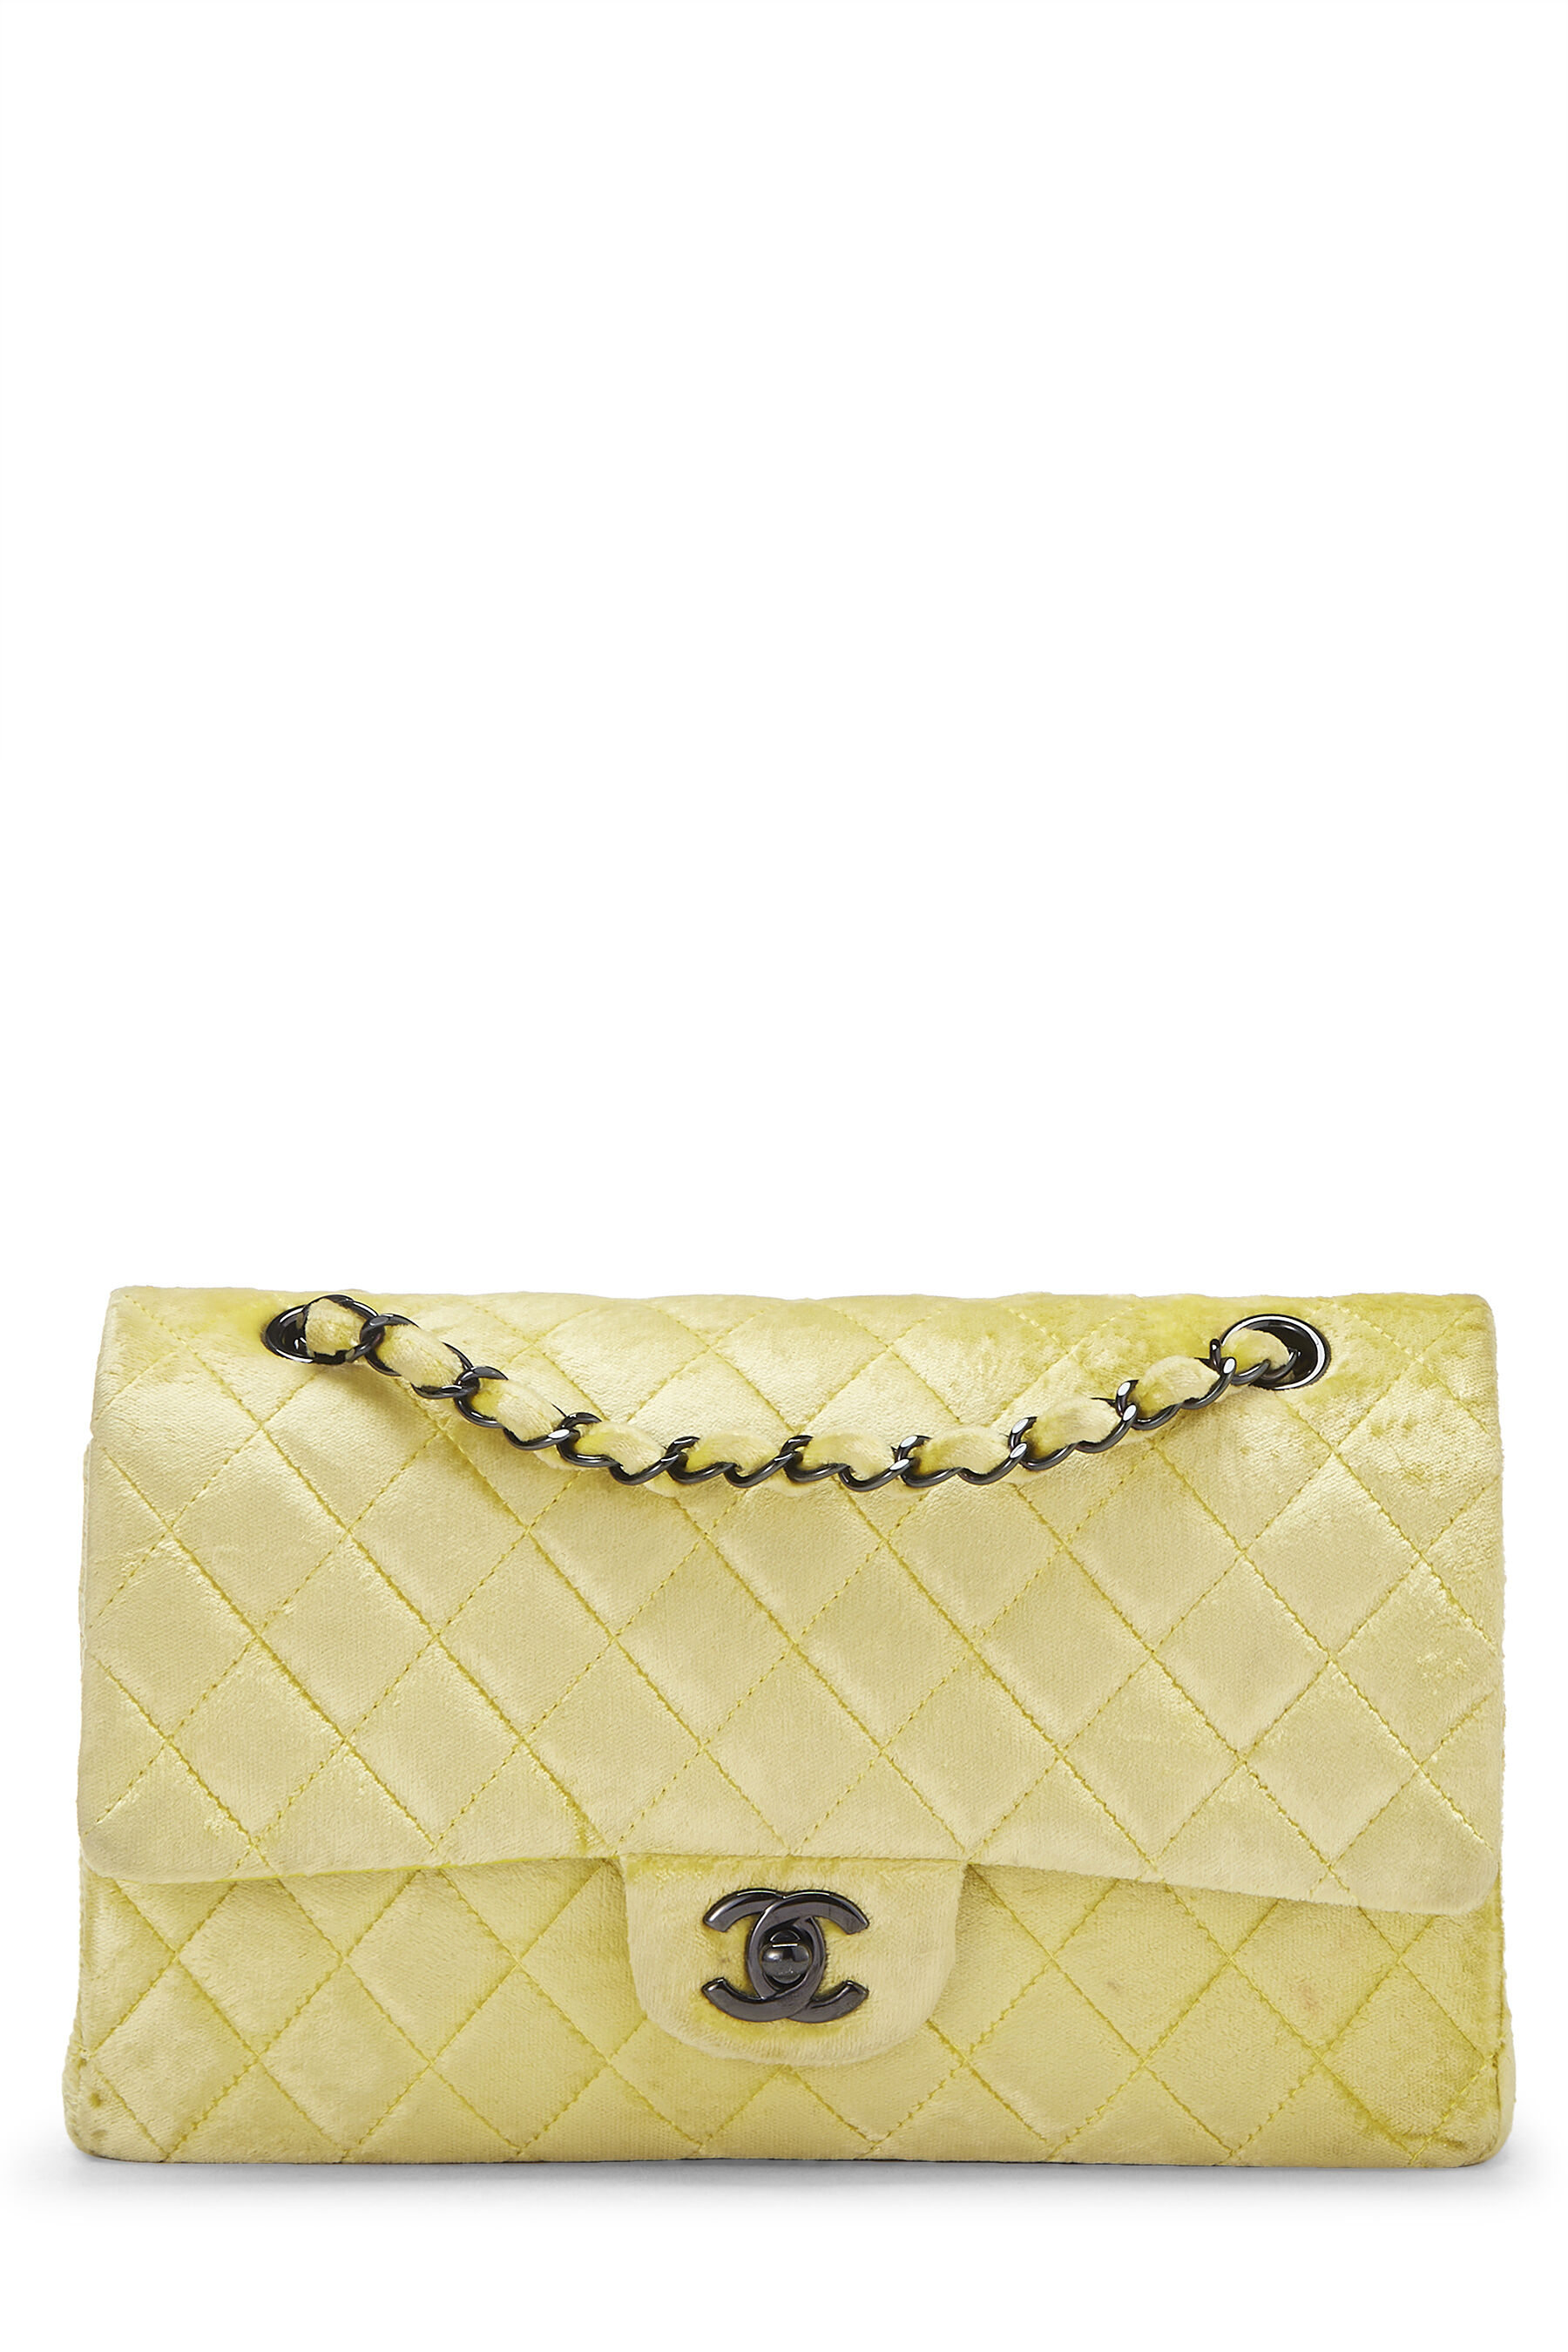 Chanel Classic Double Flap Bag Quilted Lambskin Small Yellow 54710138